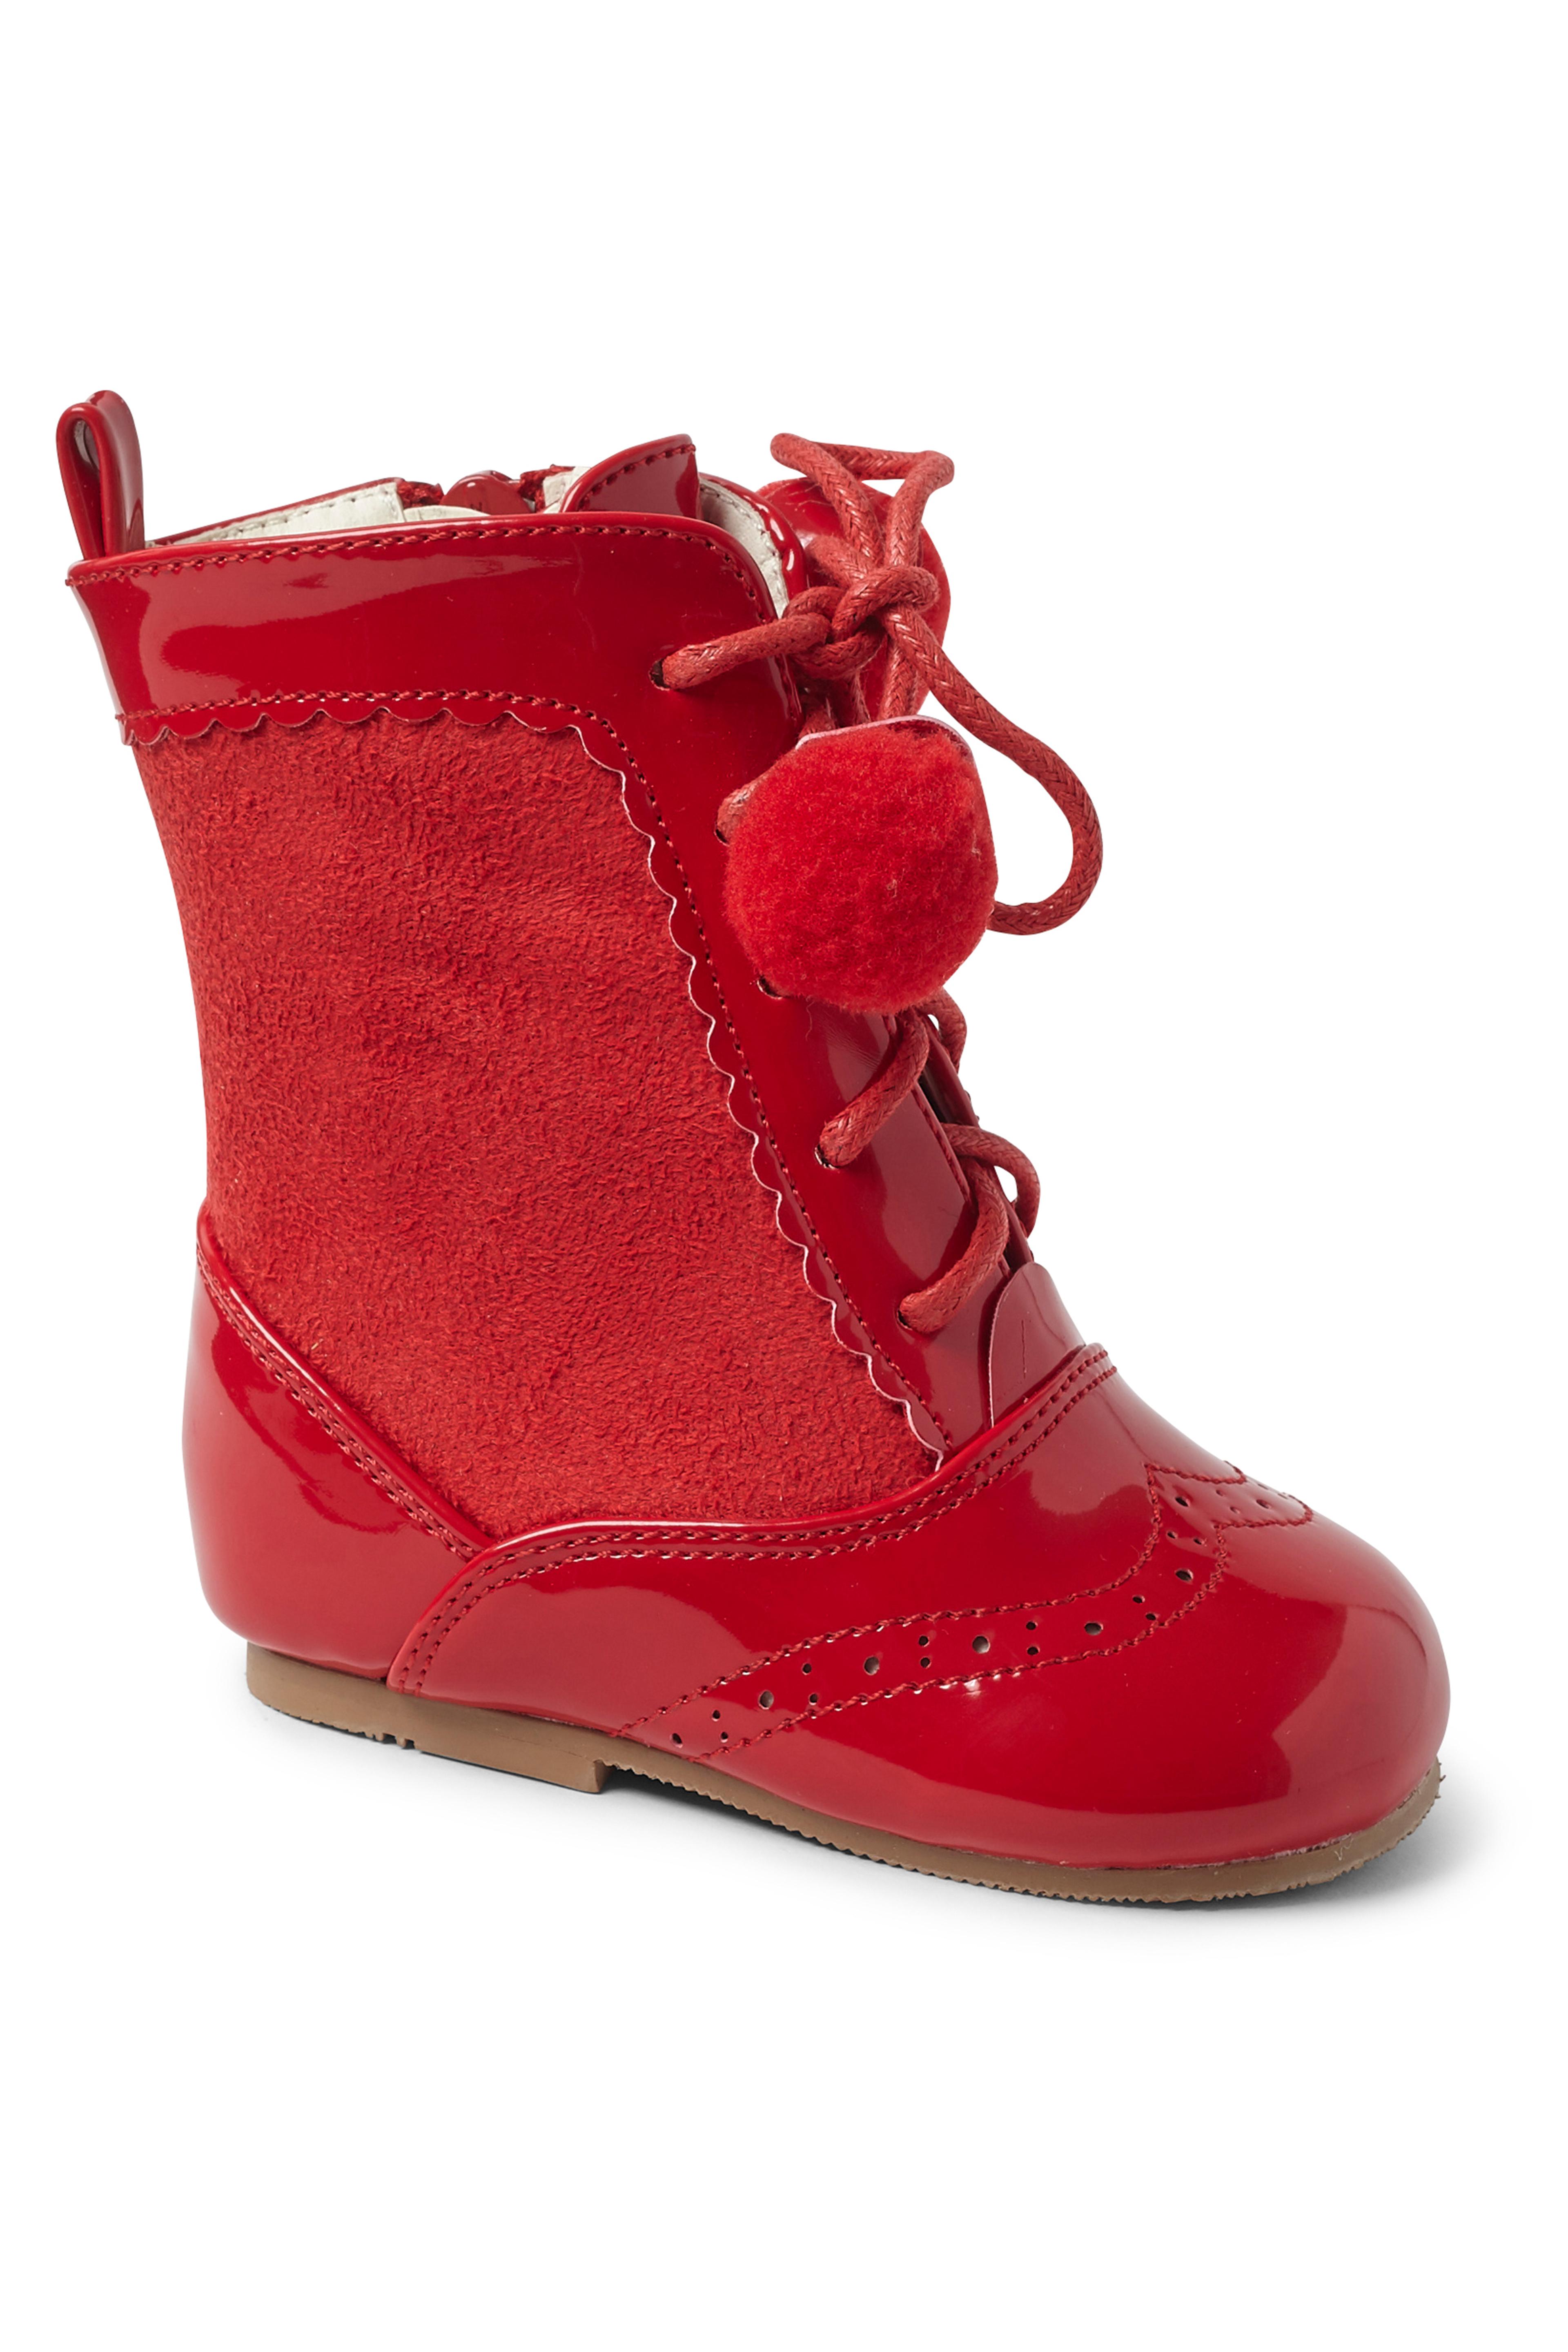 Kids Patent Leather Sienna Brogue Boots with Lace-Up and Pom-Pom Details, Unisex Classic Footwear - Red